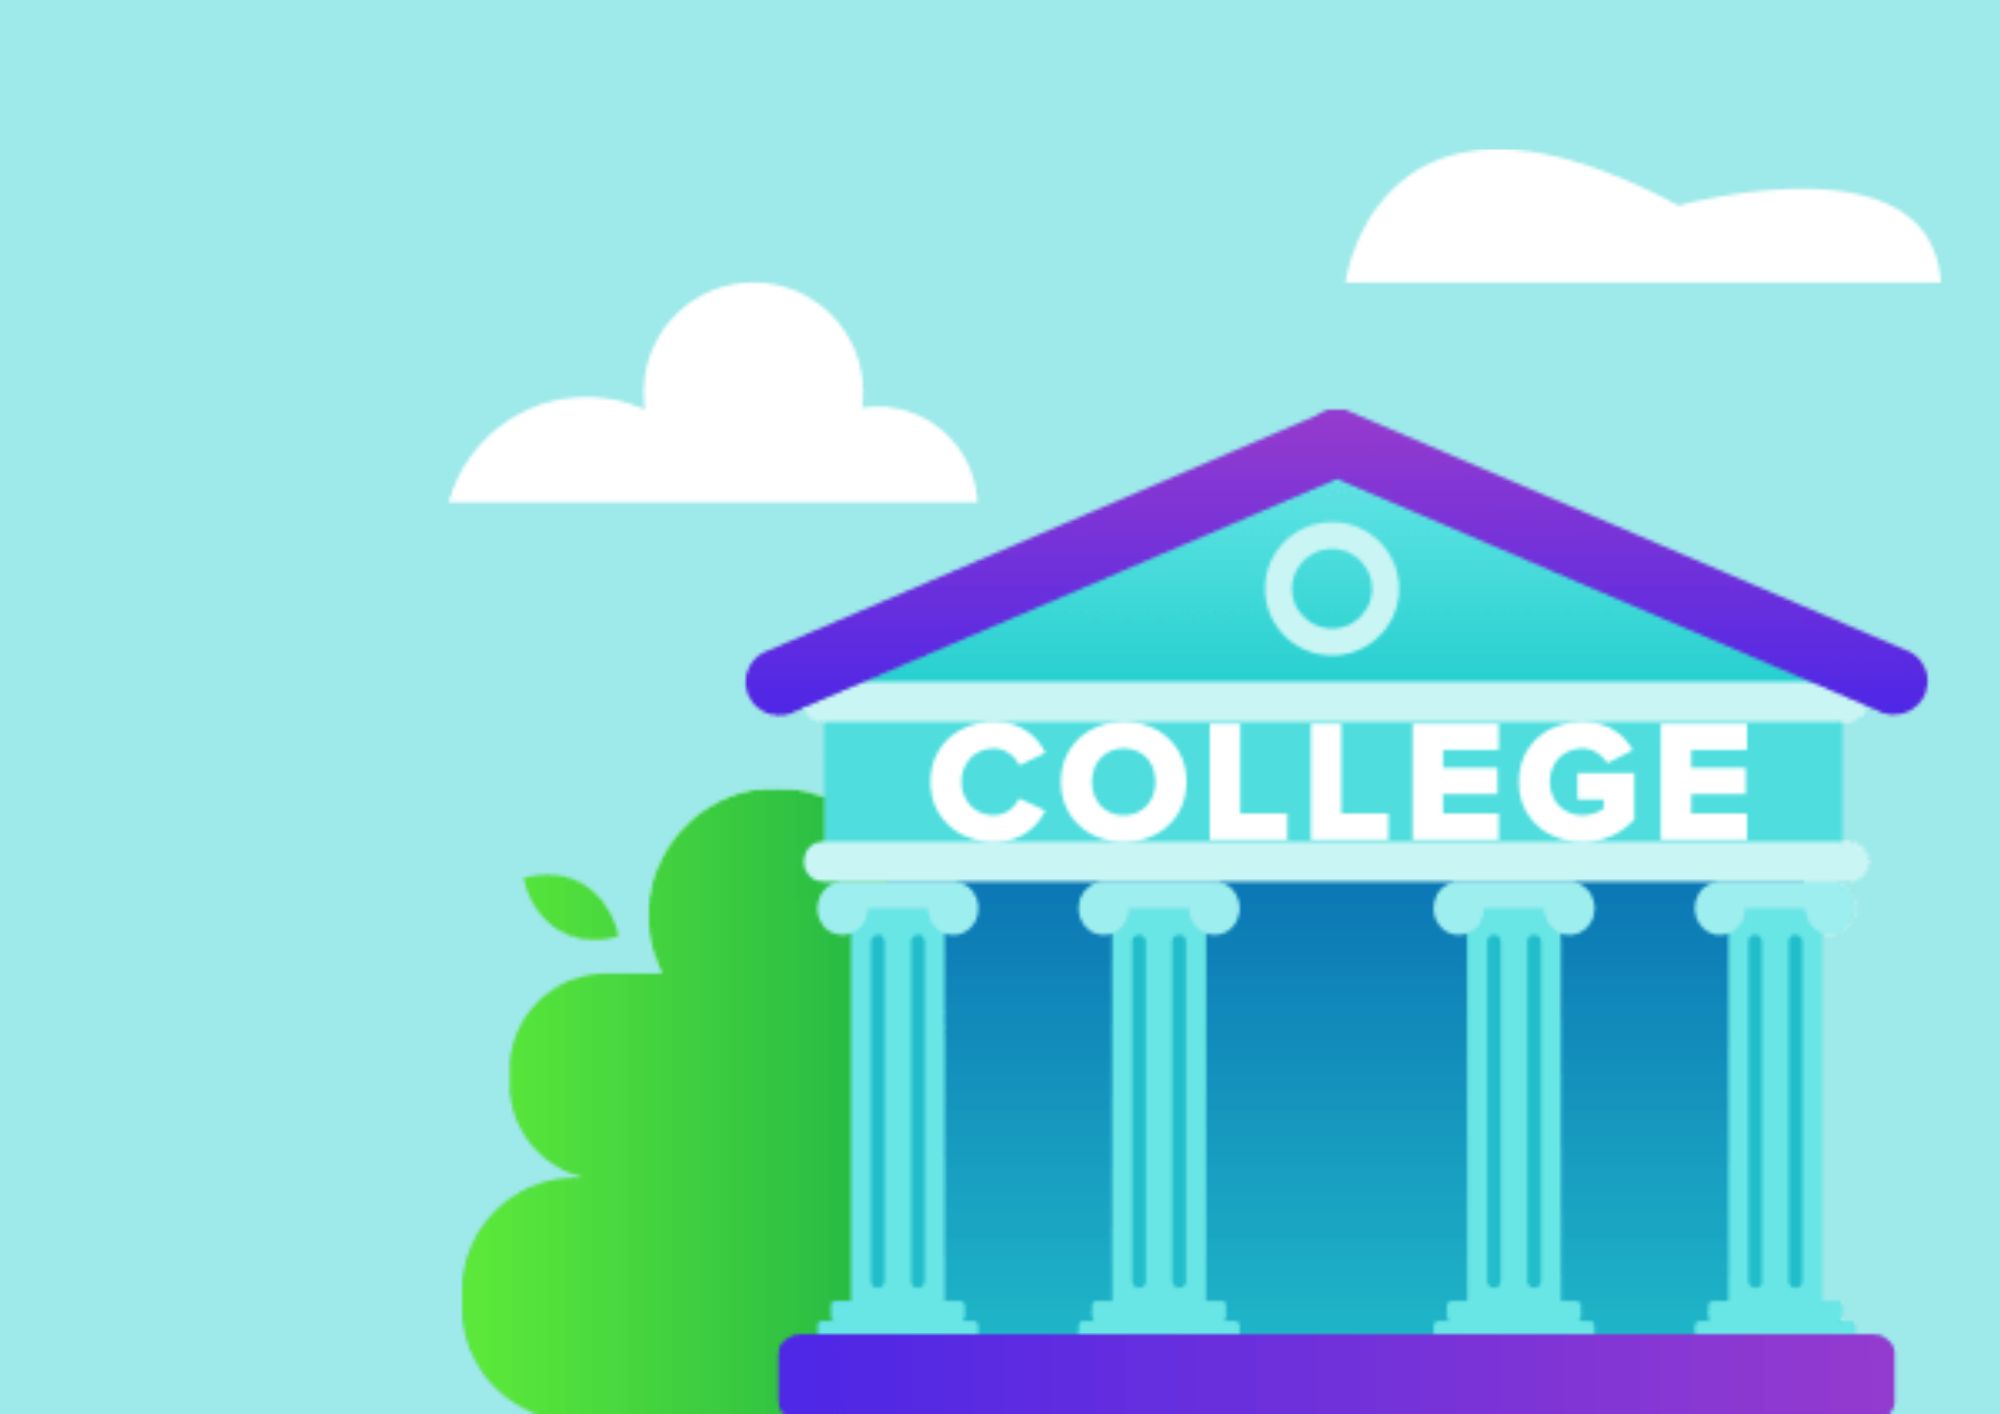 College Ka Full Form | College Full Form | Full Form Of College